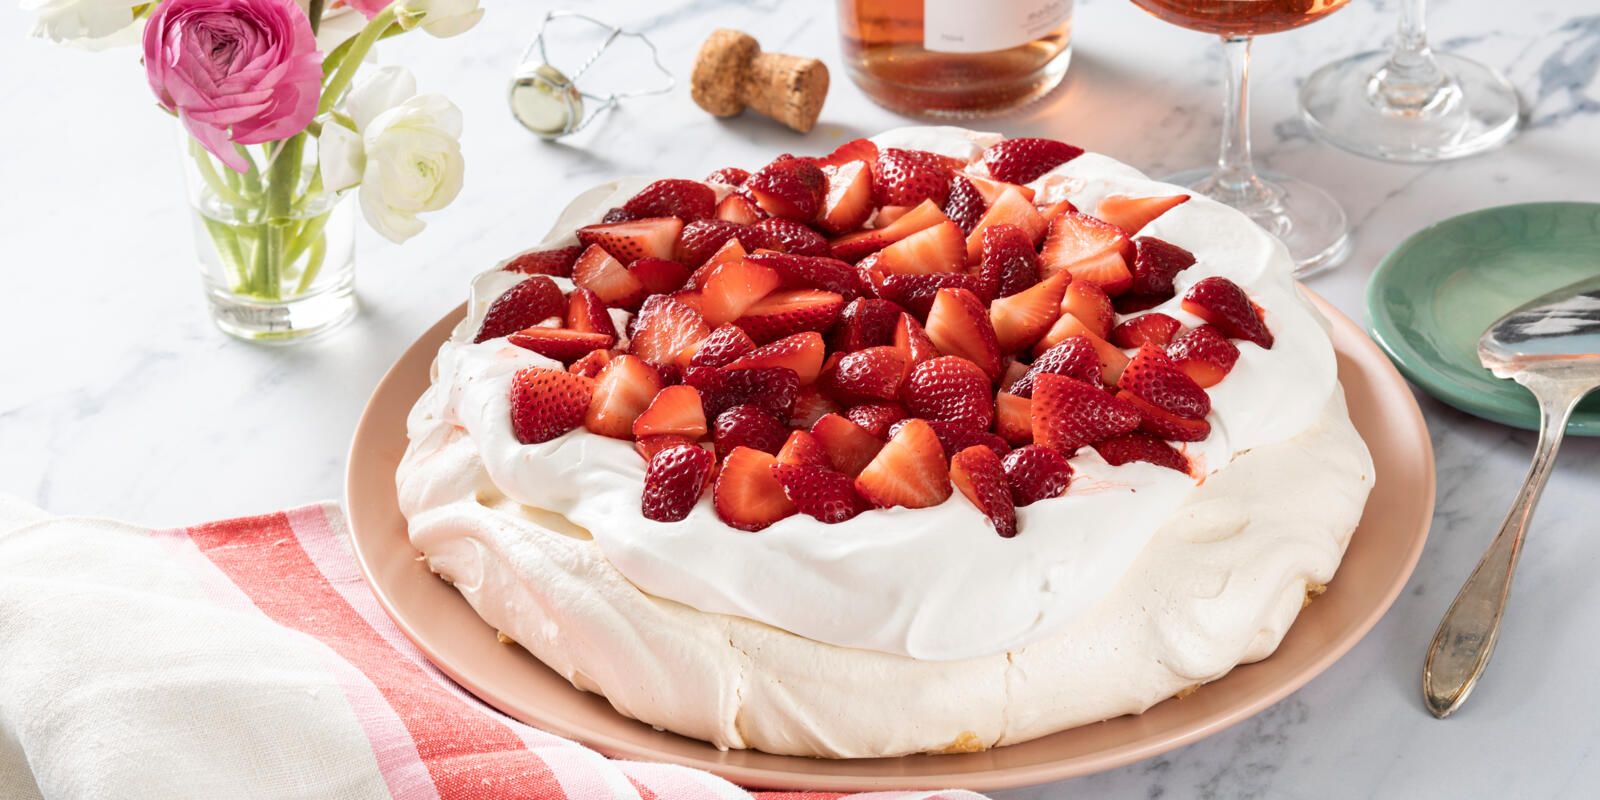 Easy Pavlova - Craving Home Cooked